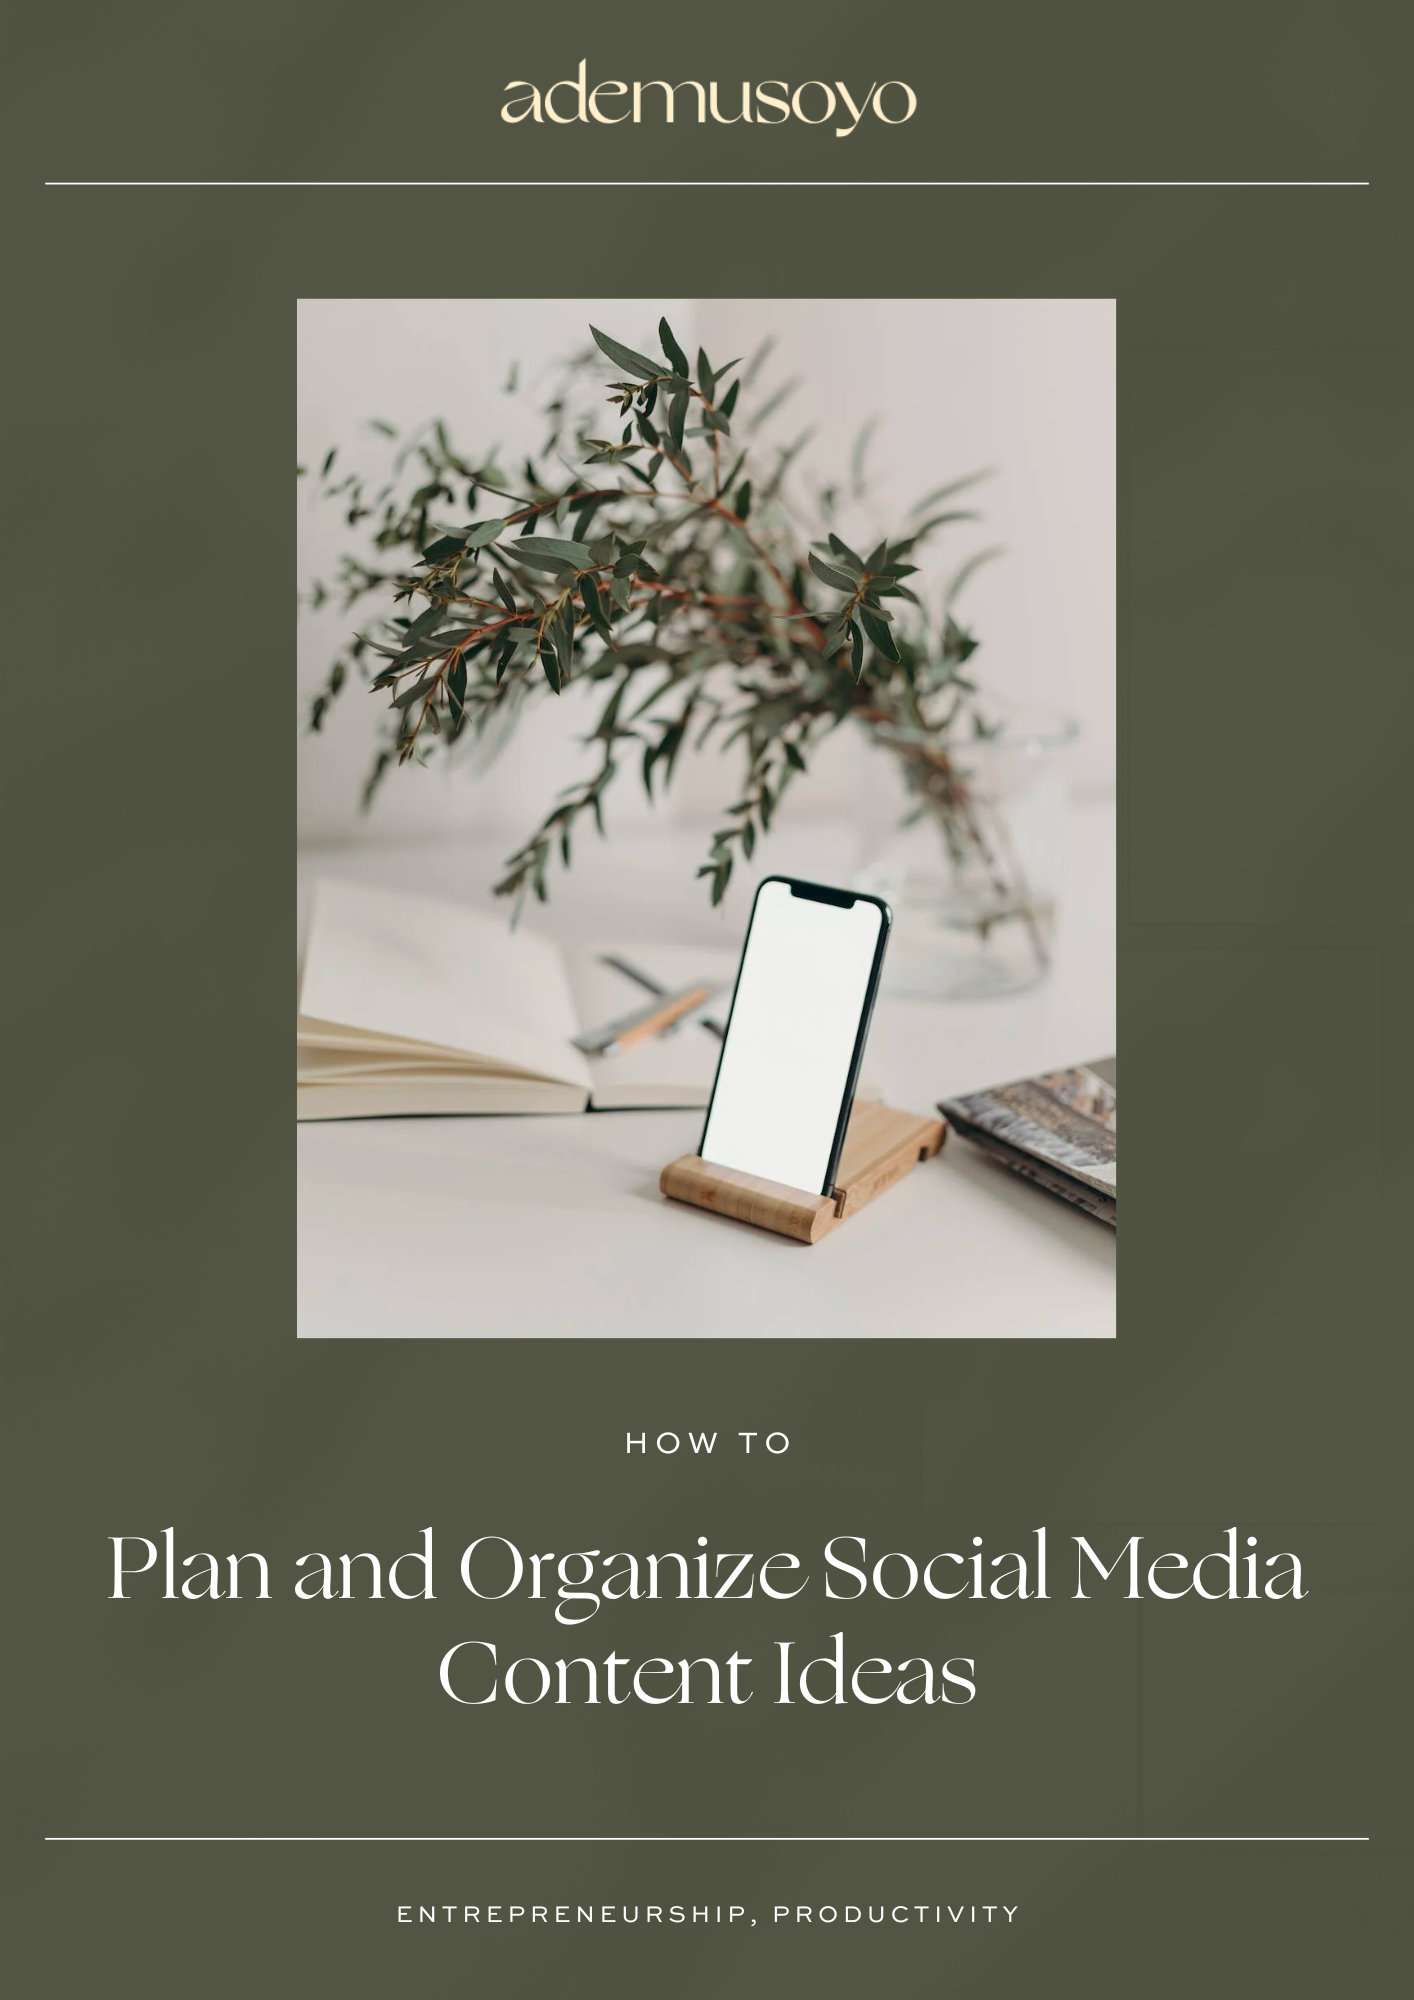 a mobile phone on a mobile phone stand and an overlay text on a green background that says "how to plan and organize social media content ideas", social media content scheduling,manage social media content